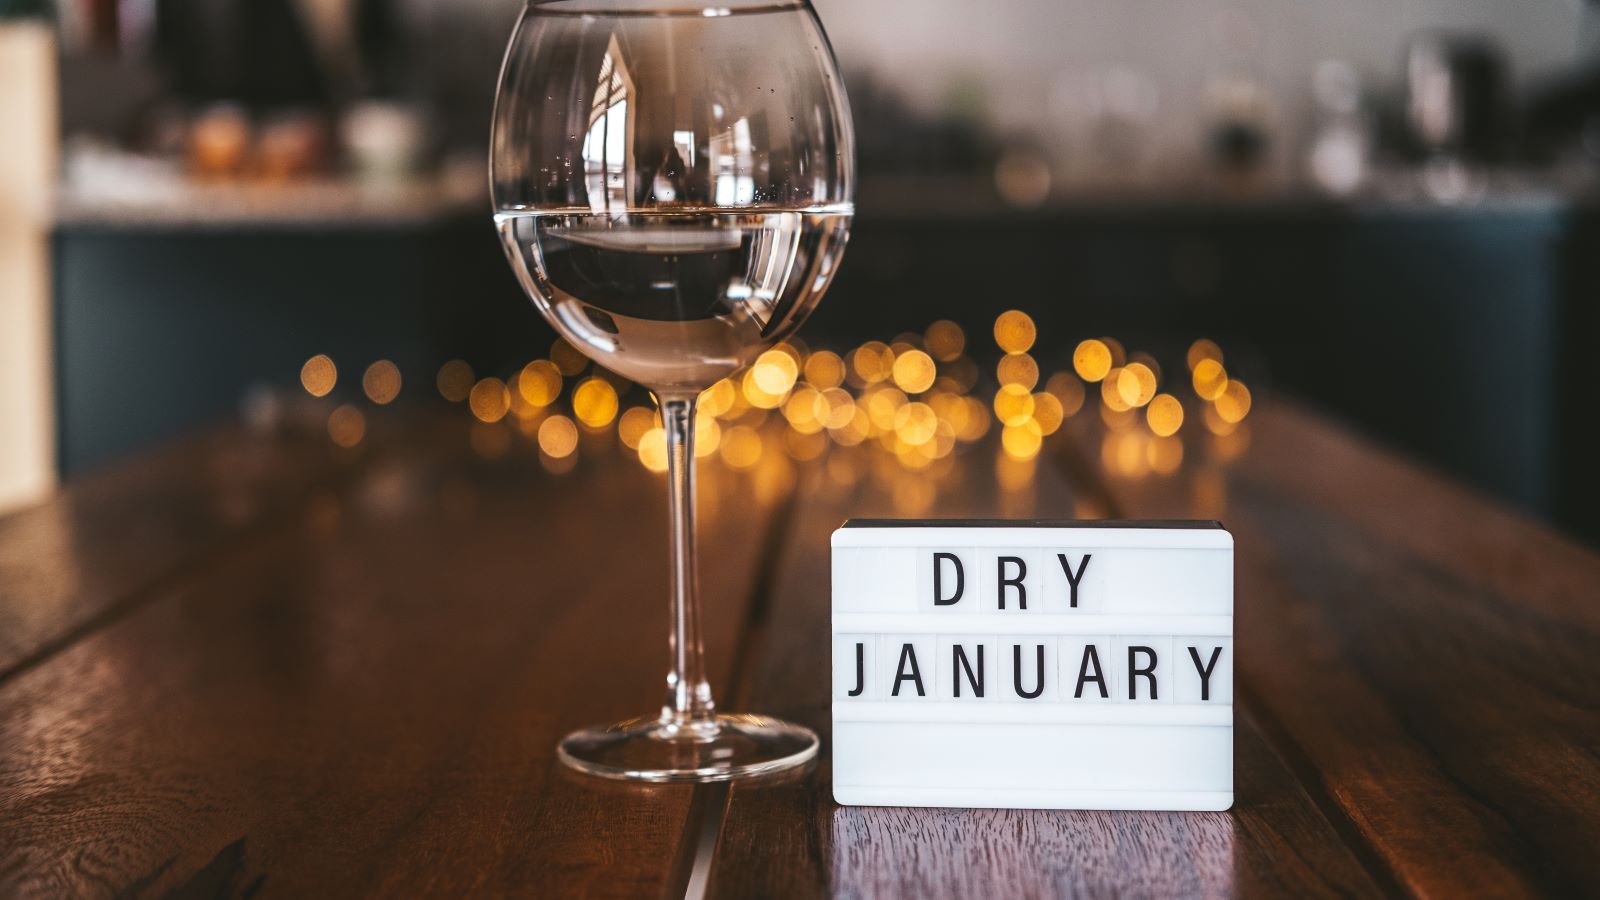 Starting Dry January is one thing. Completing it is another. An addiction expert shares tips to finish strong.